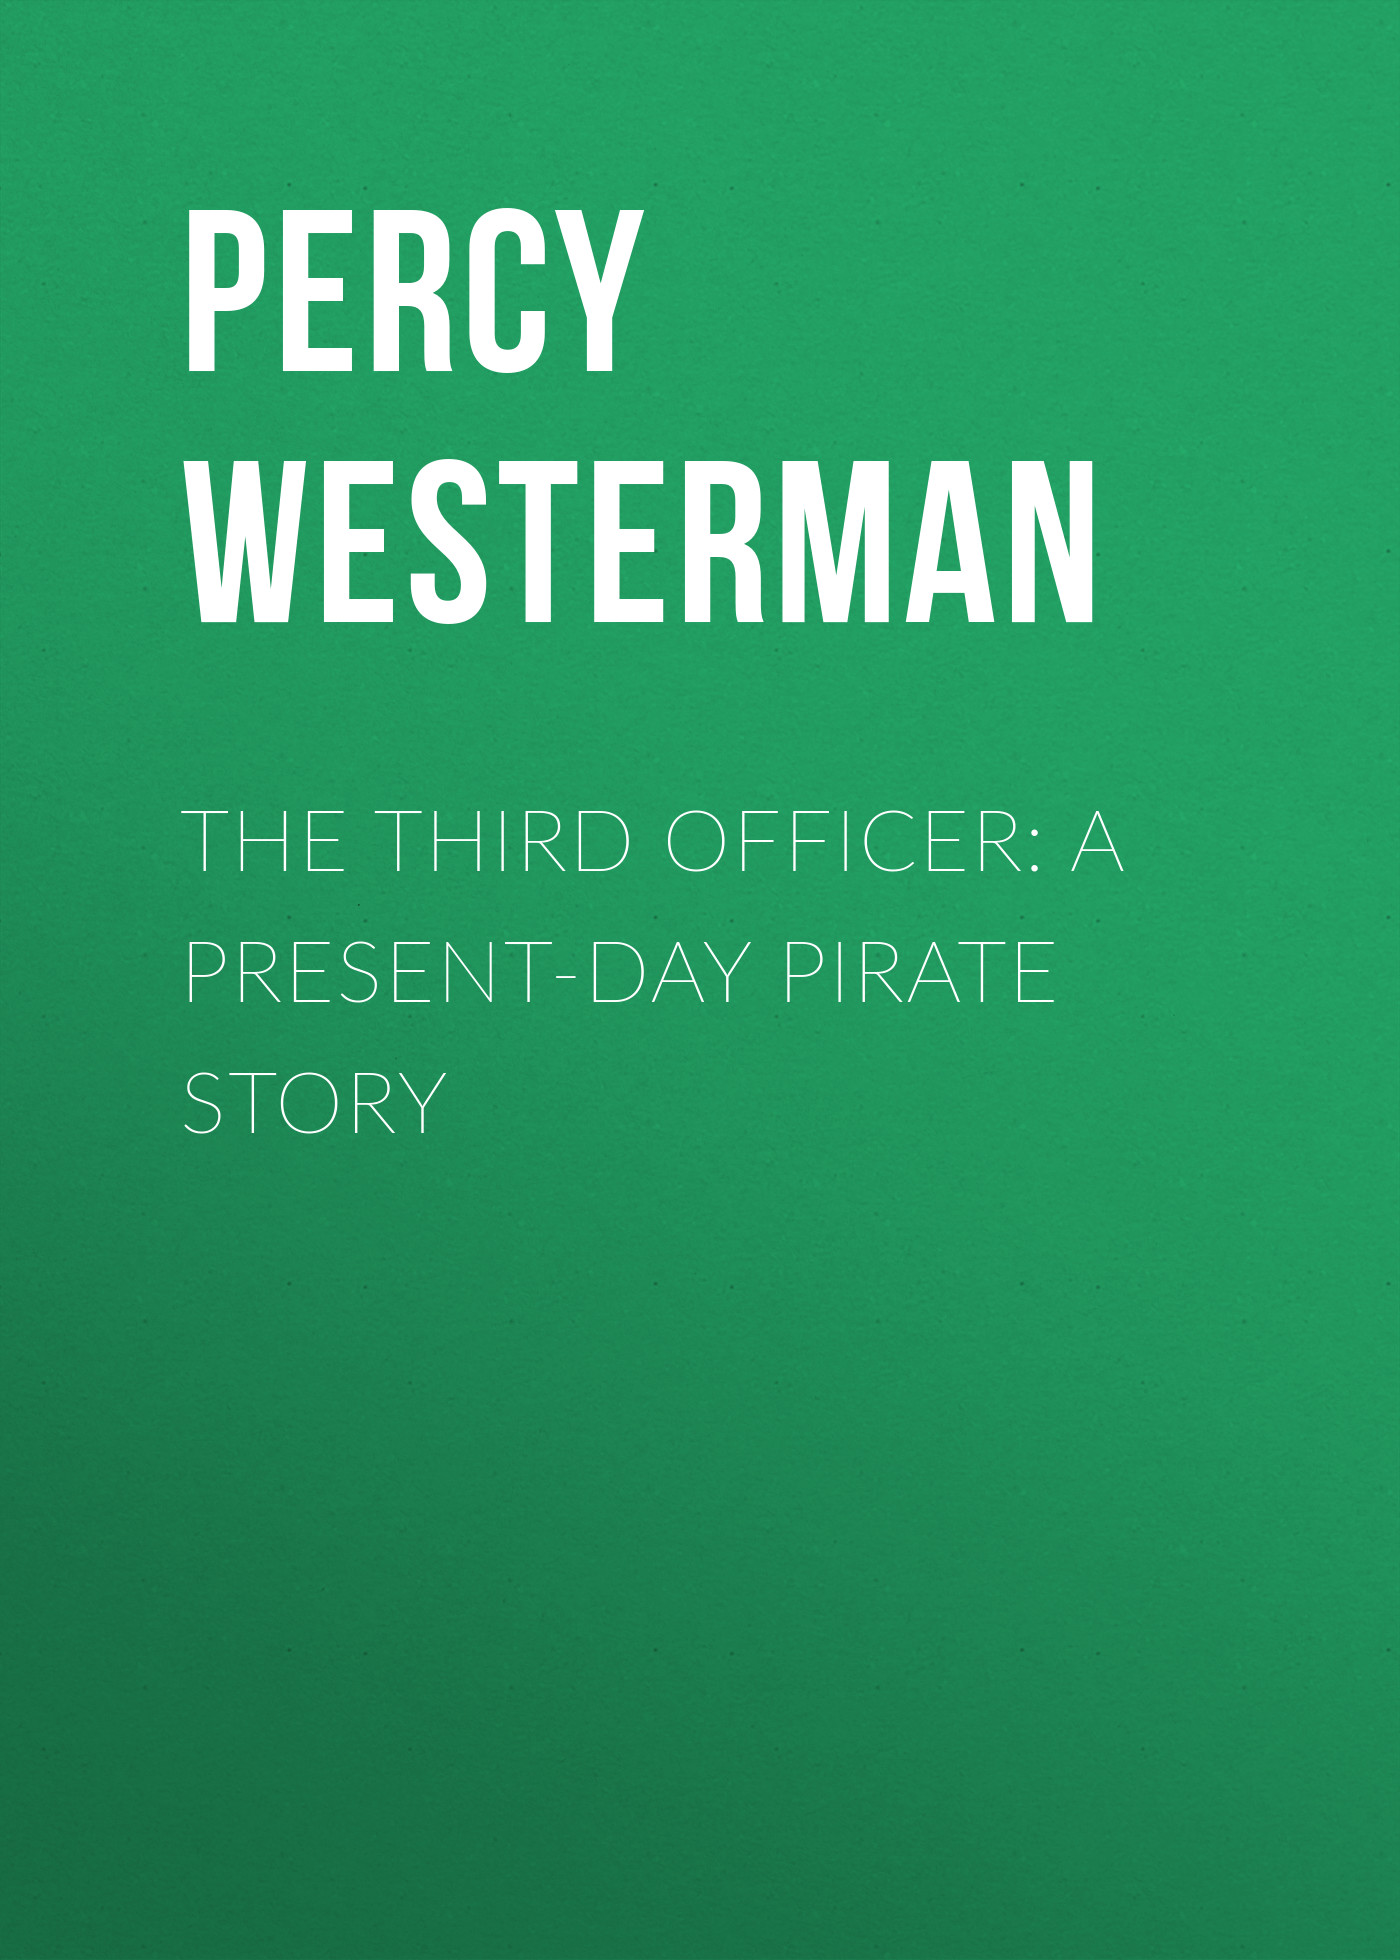 The Third Officer: A Present-day Pirate Story